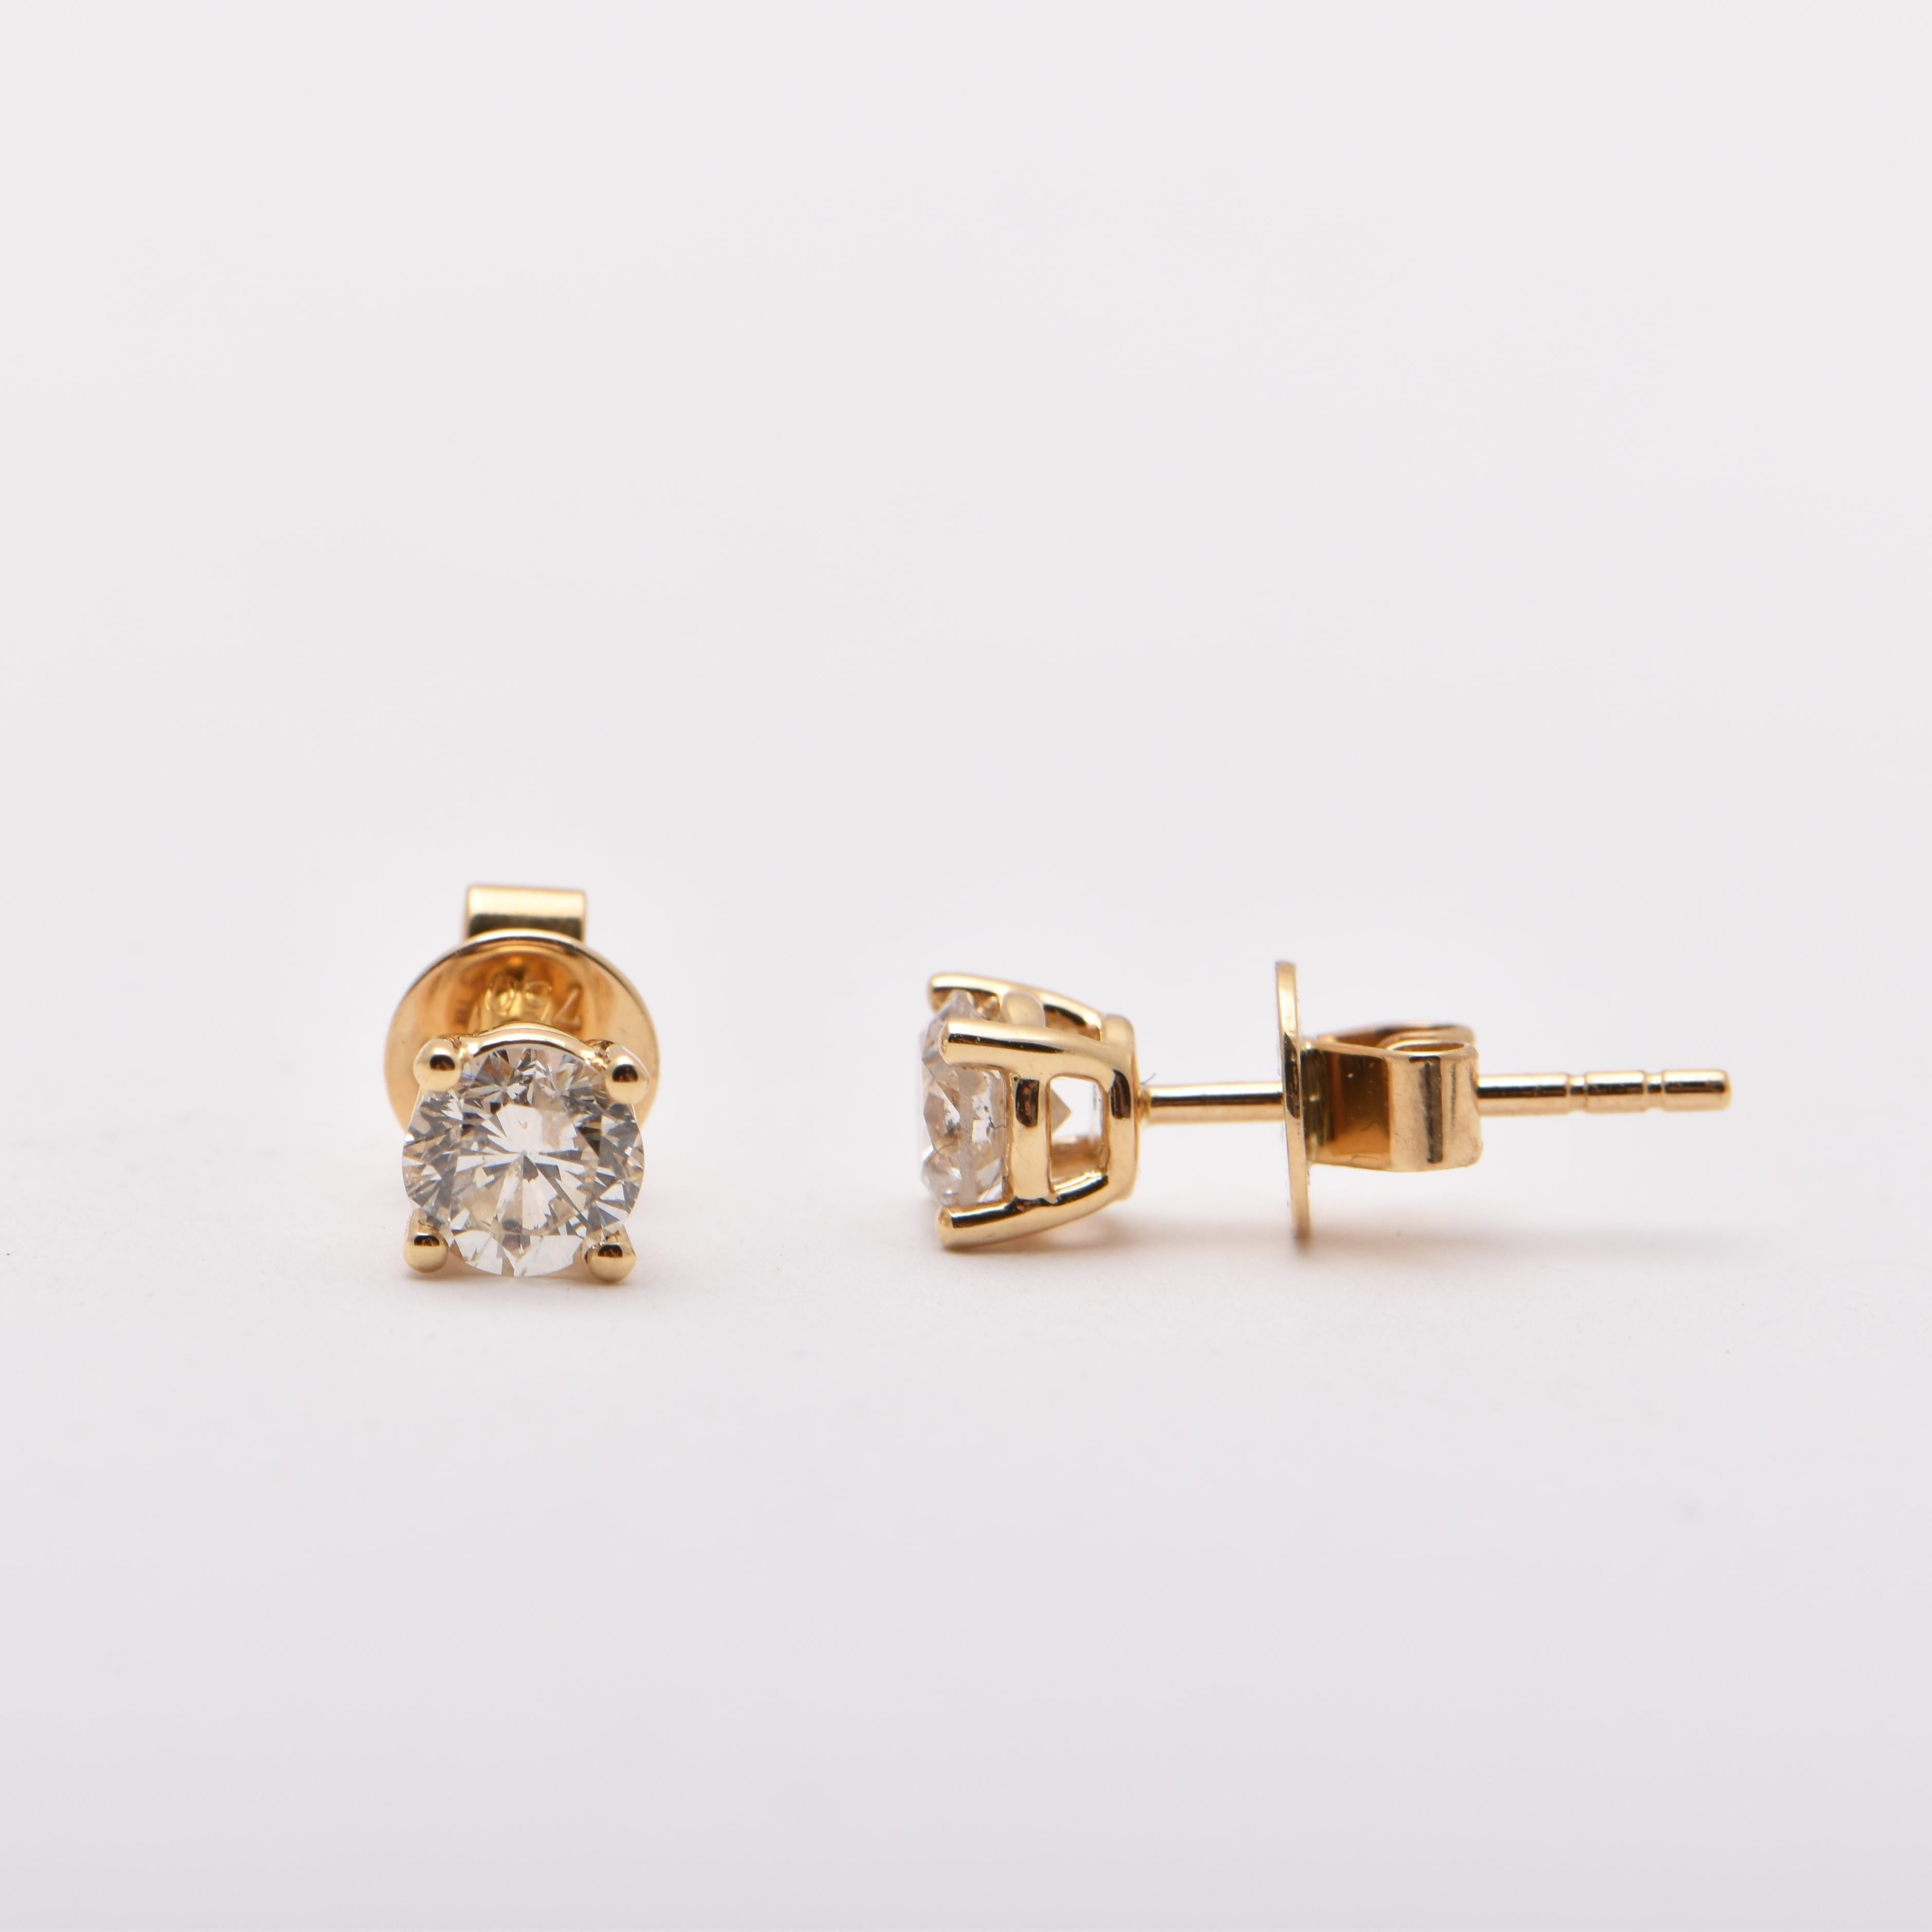 0.68 Carat Diamond Studs in 18 Carat Yellow Gold by Cartmer Jewellery   

2 Diamonds totalling 0.68 carats 

FREE express postage usually 3-4 days Sydney to New York  
FREE international insurance  
by Cartmer Jewellery, The Dymocks Building, Sydney